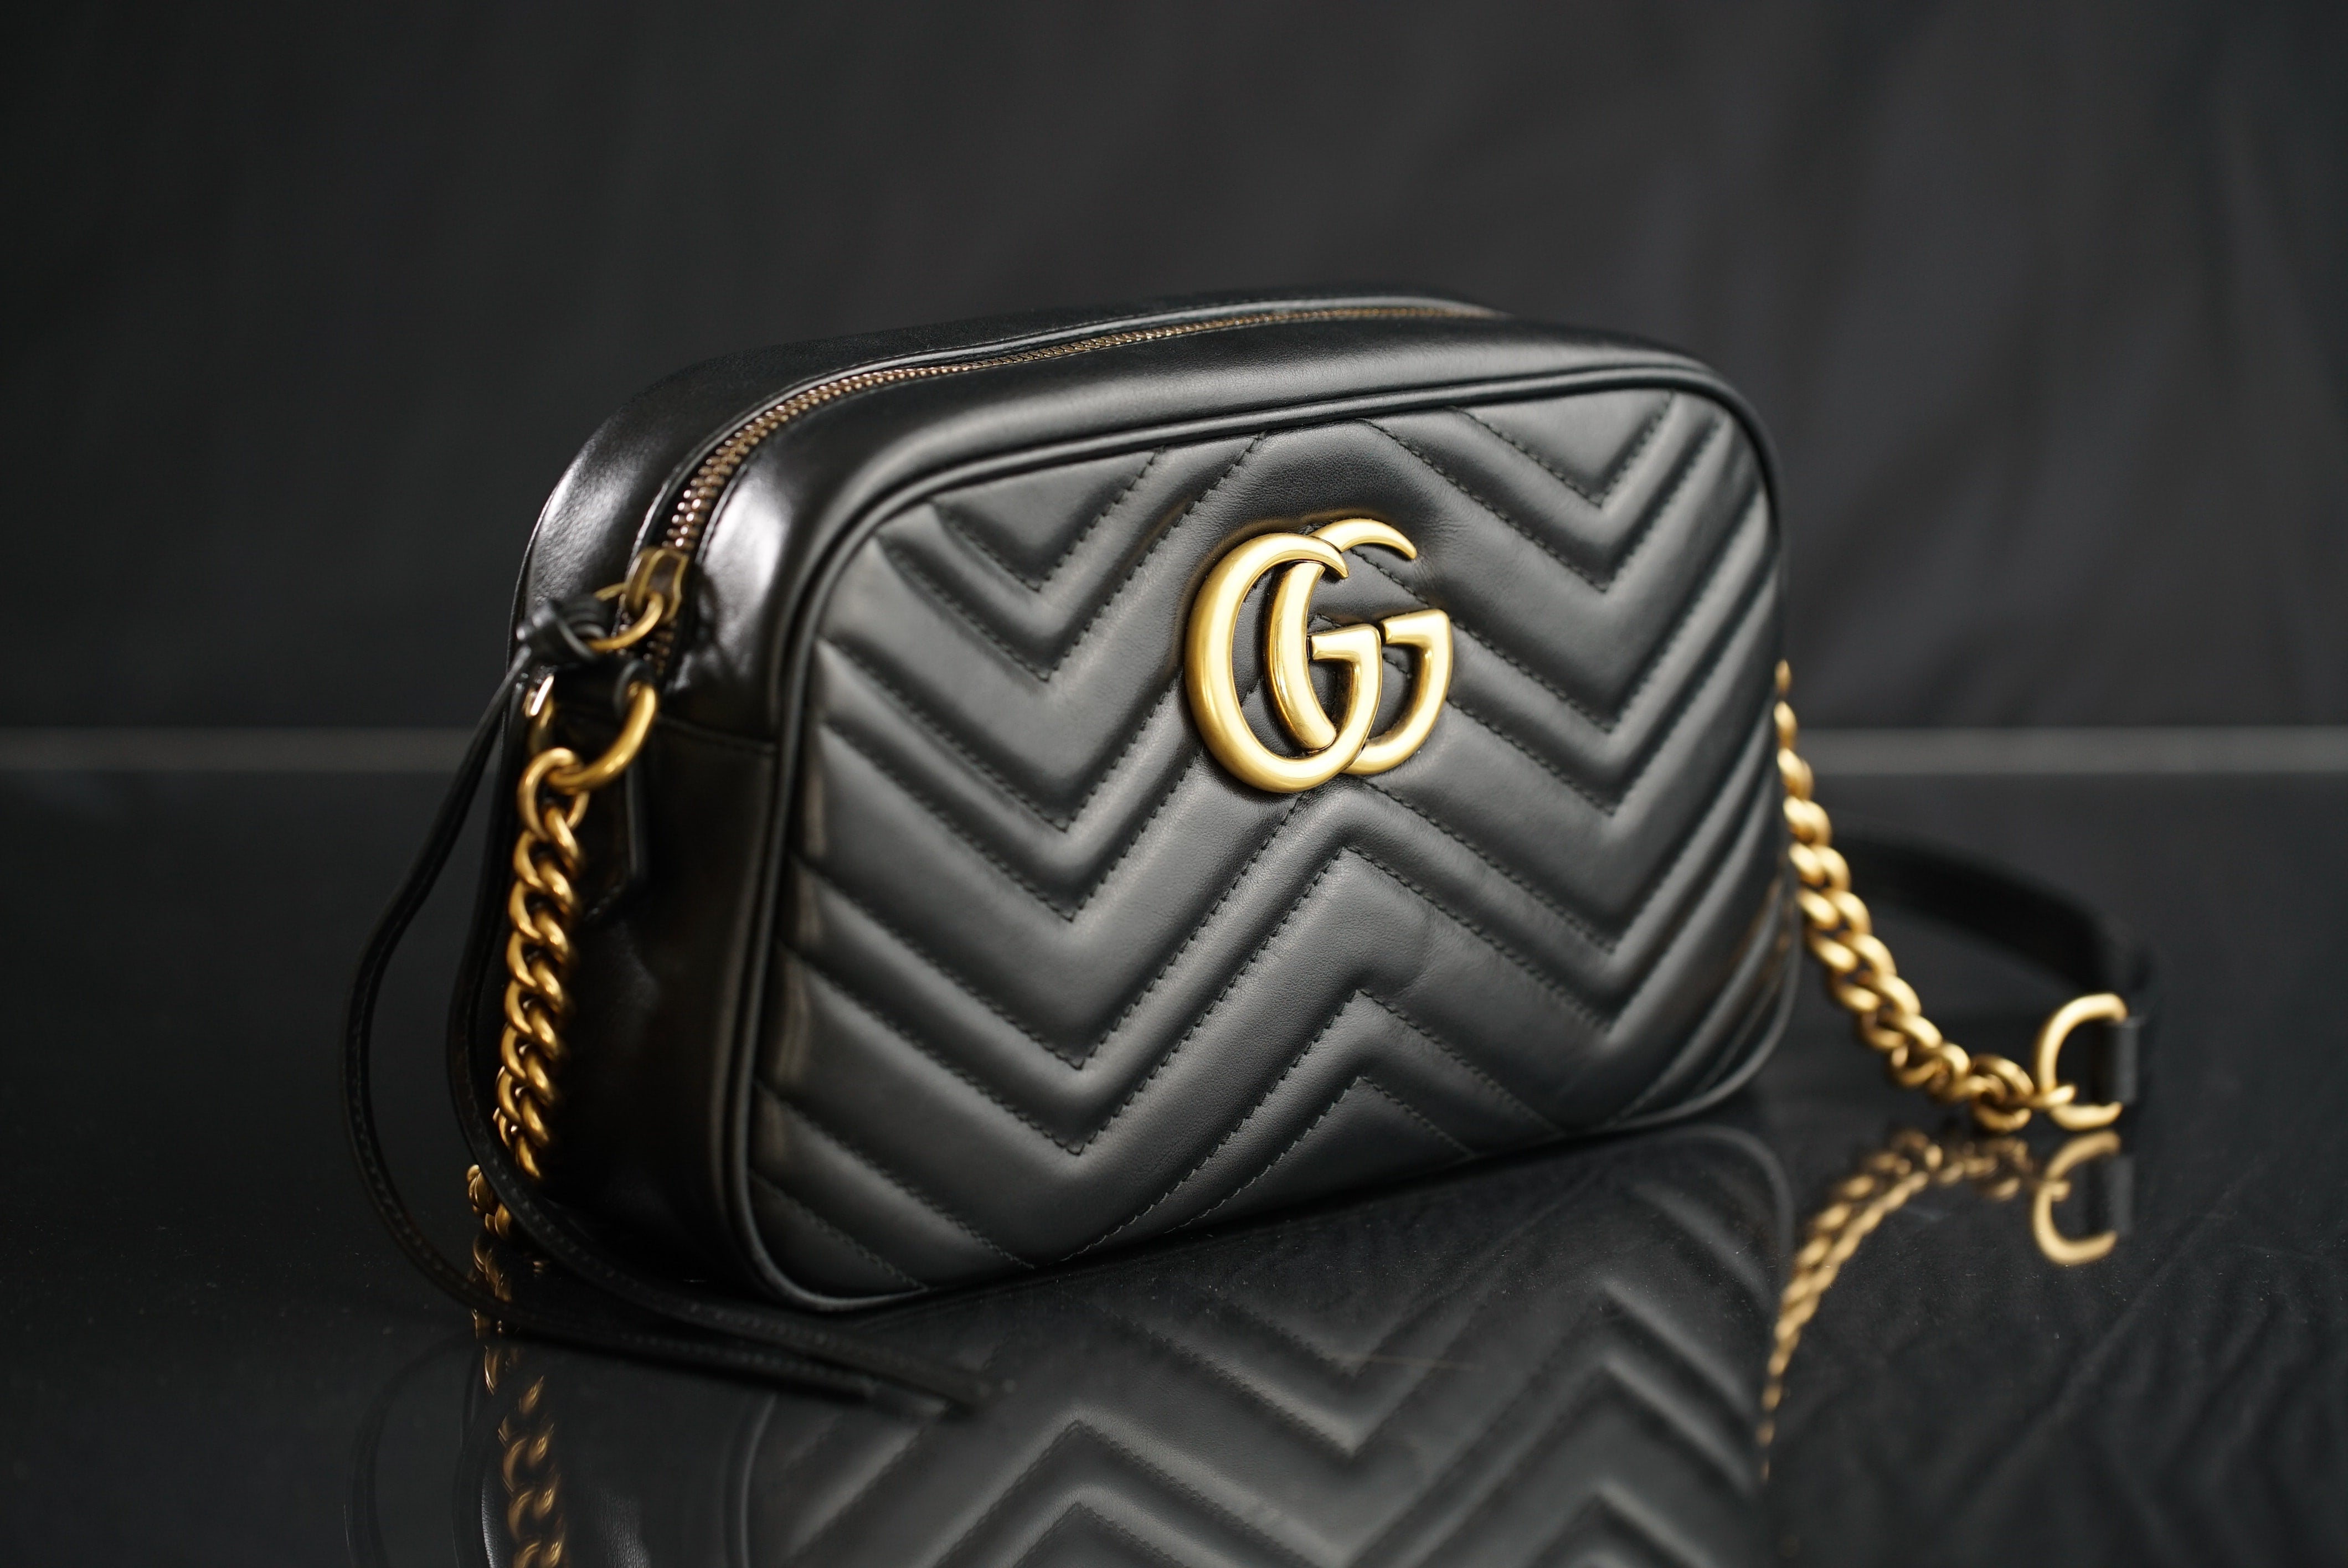 Leather Gucci bag: Everything you need to know